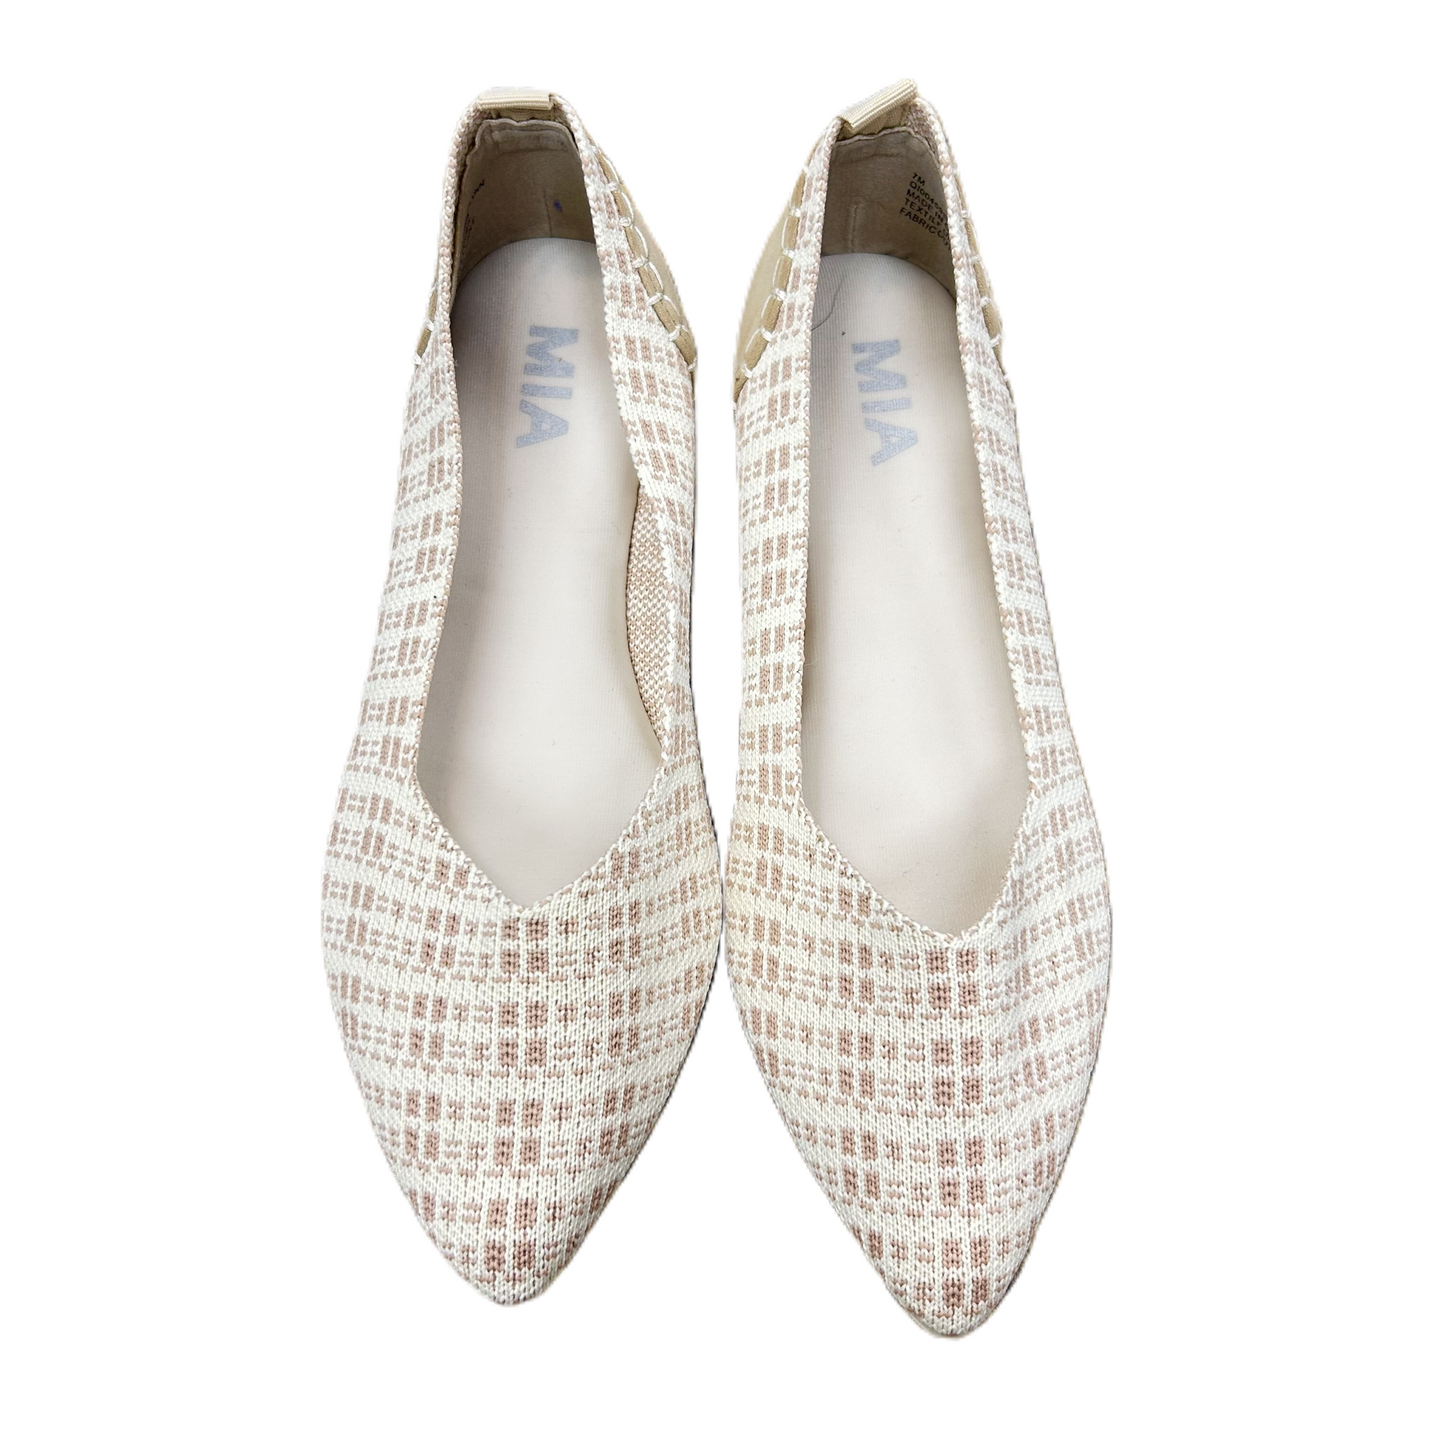 Cream & Tan Shoes Flats By Mia, Size: 7